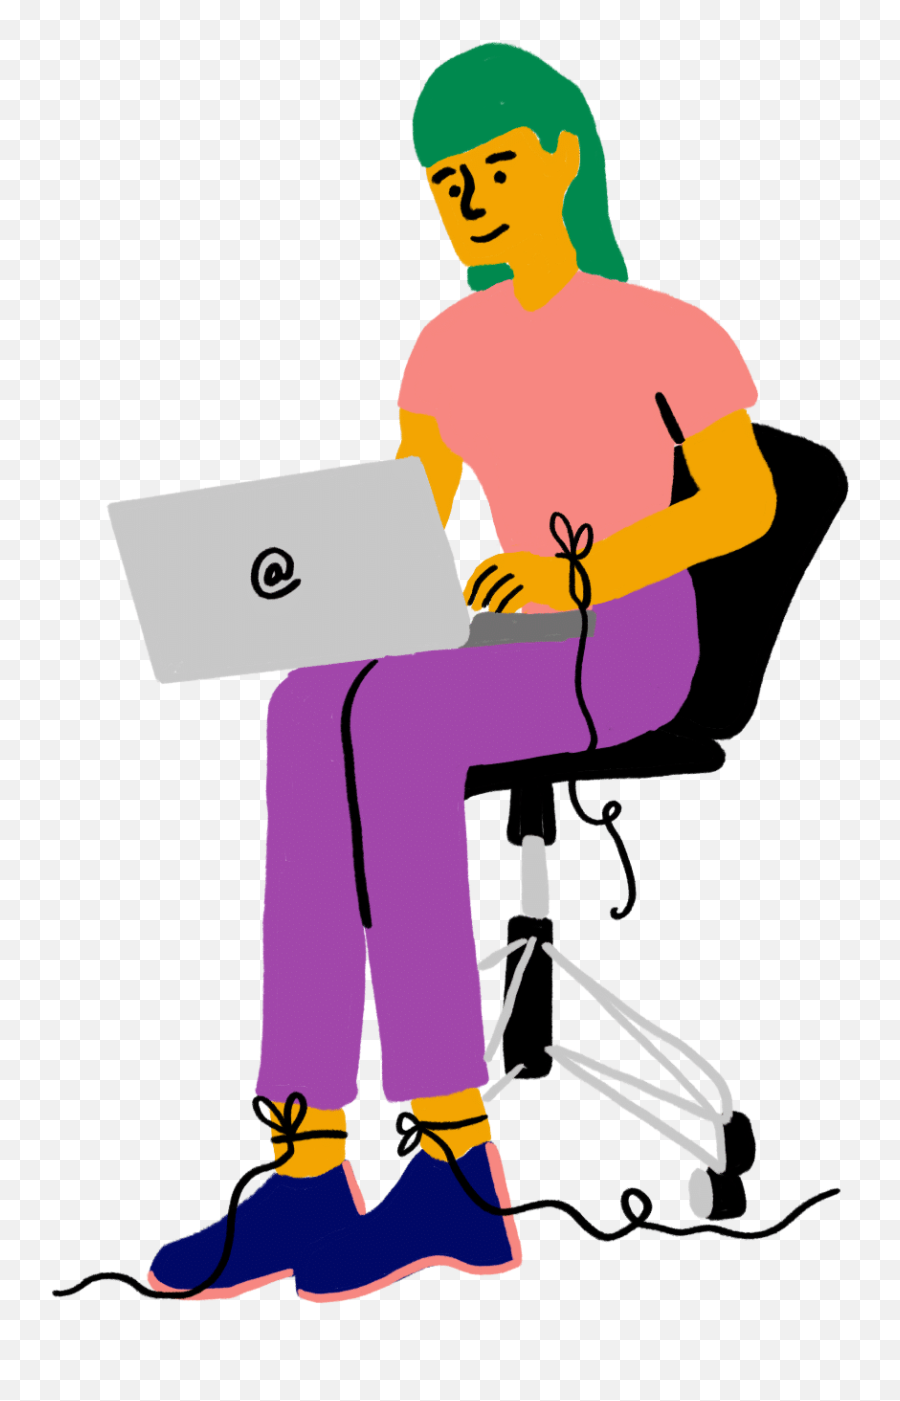 For Developers Build A Better Internet The Company Emoji,Posture Clipart